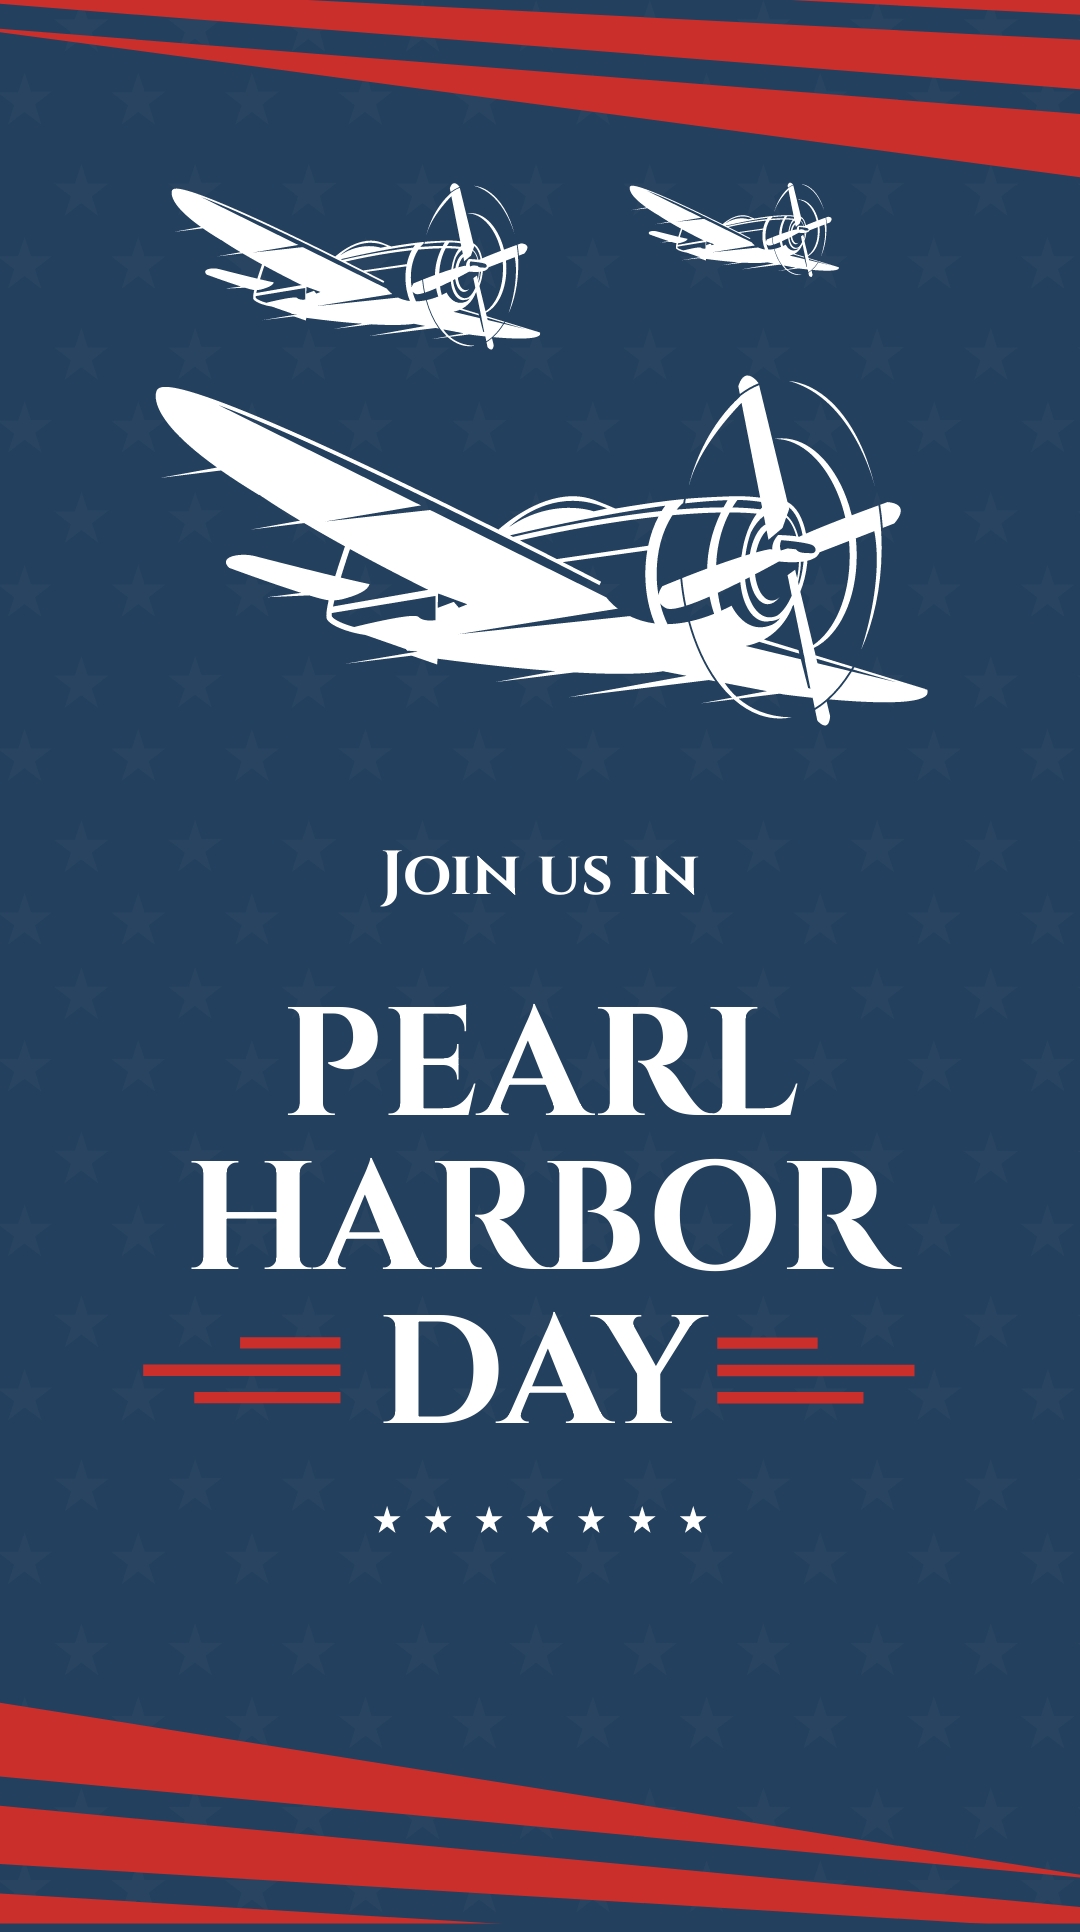 Pearl Harbor Day Event Whatsapp Post Template